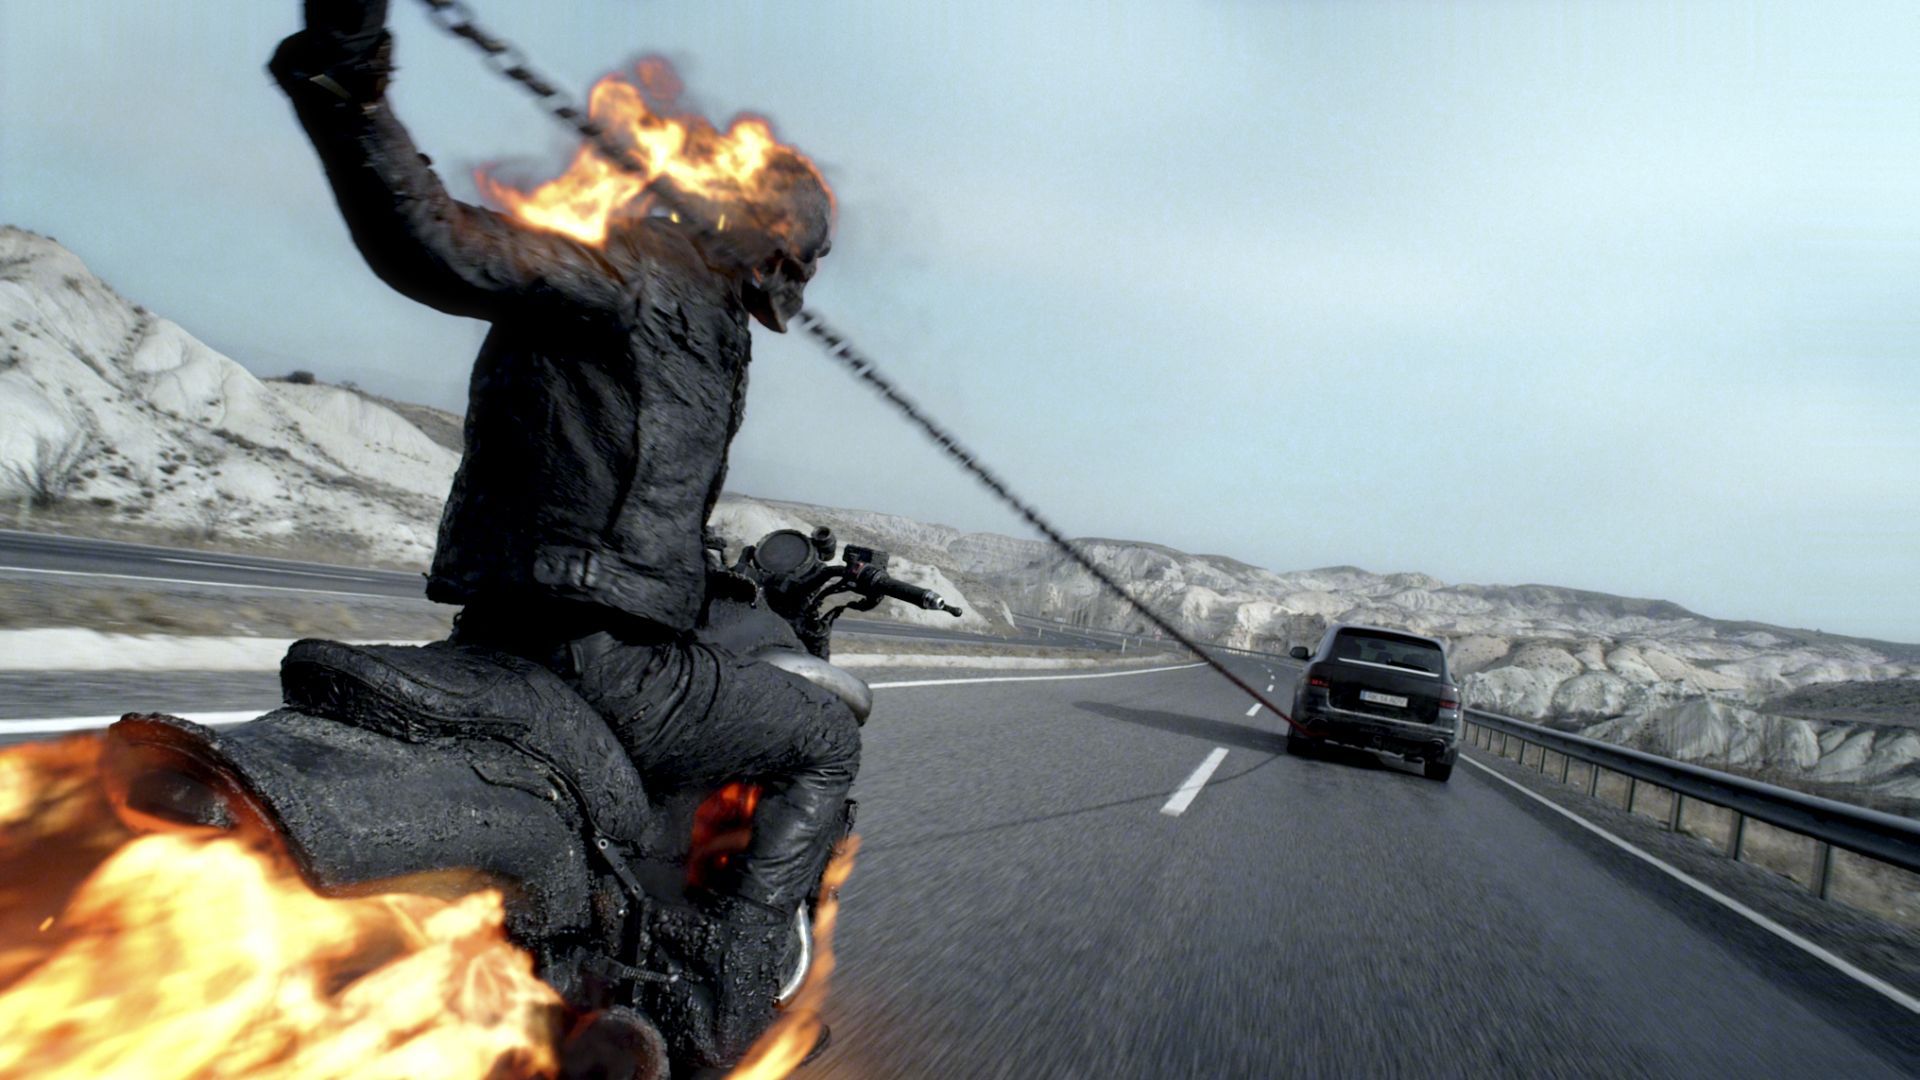 ghost rider 2 others hd wallpaper | wallpapers55.com - Best ...